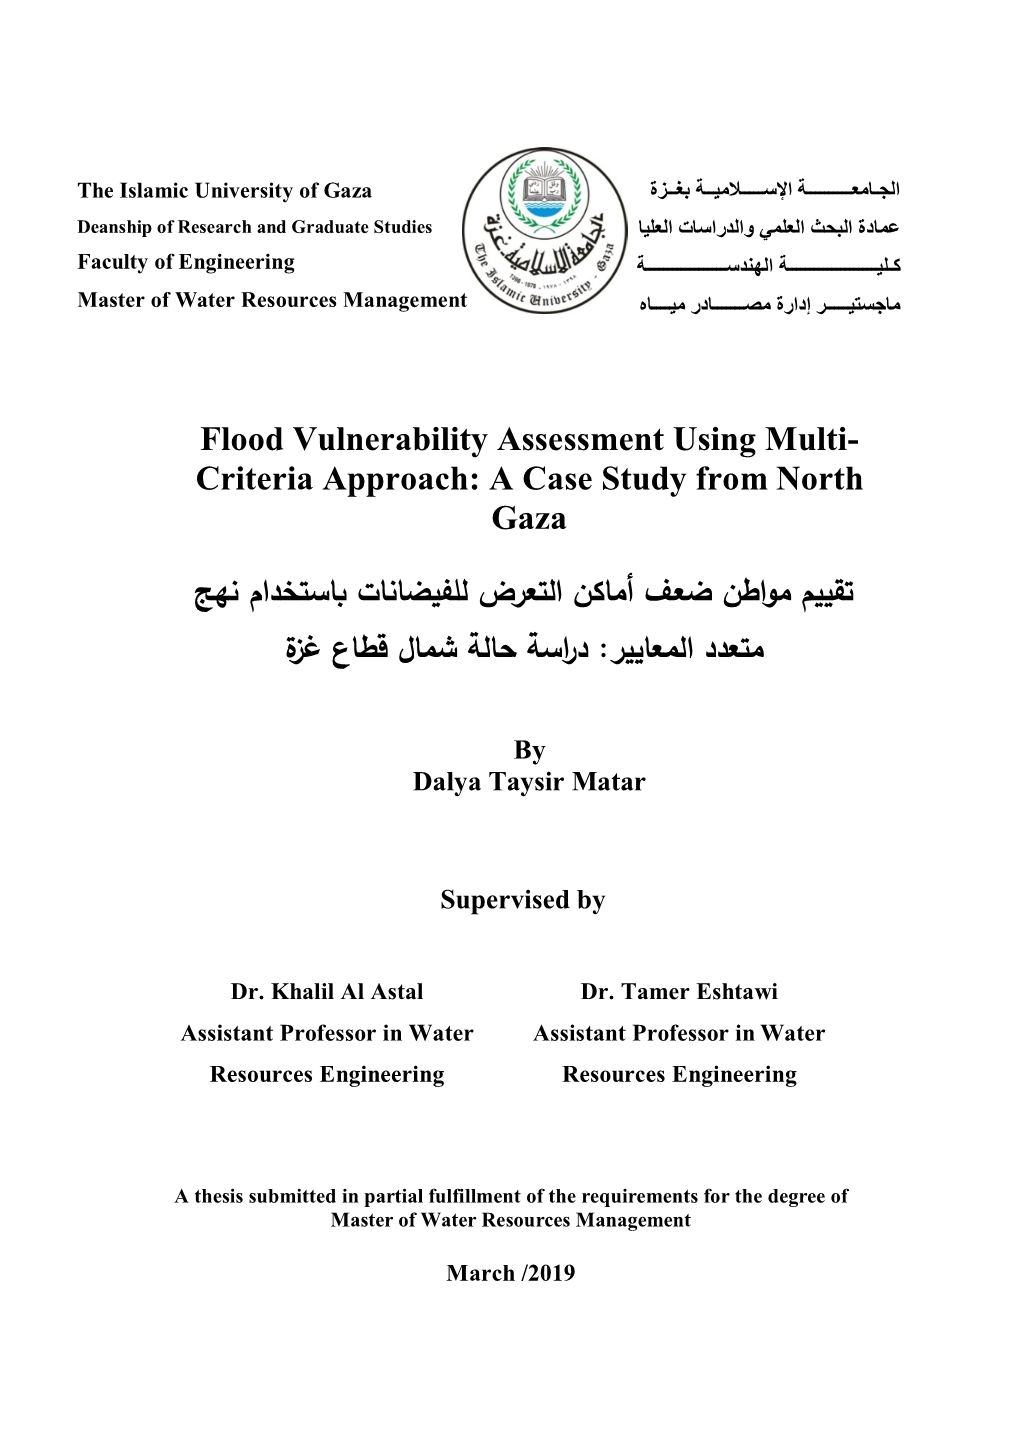 Flood Vulnerability Assessment Using Multi- Criteria Approach: a Case Study from North Gaza